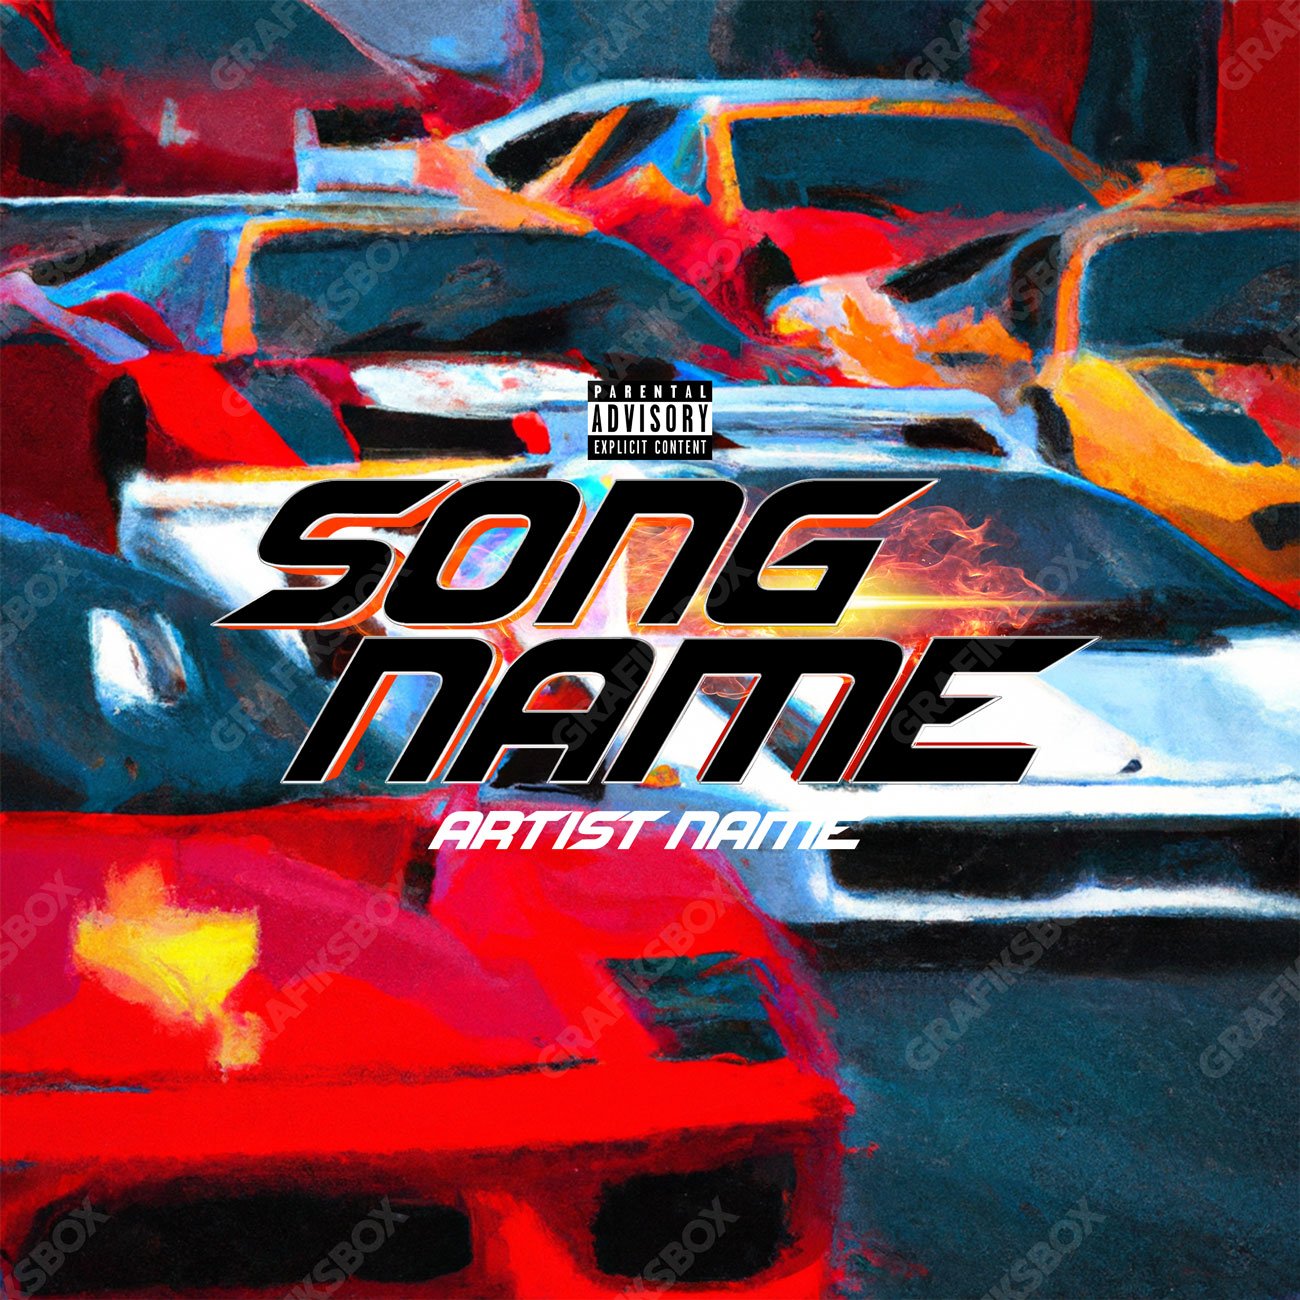 Race Day premade cover art